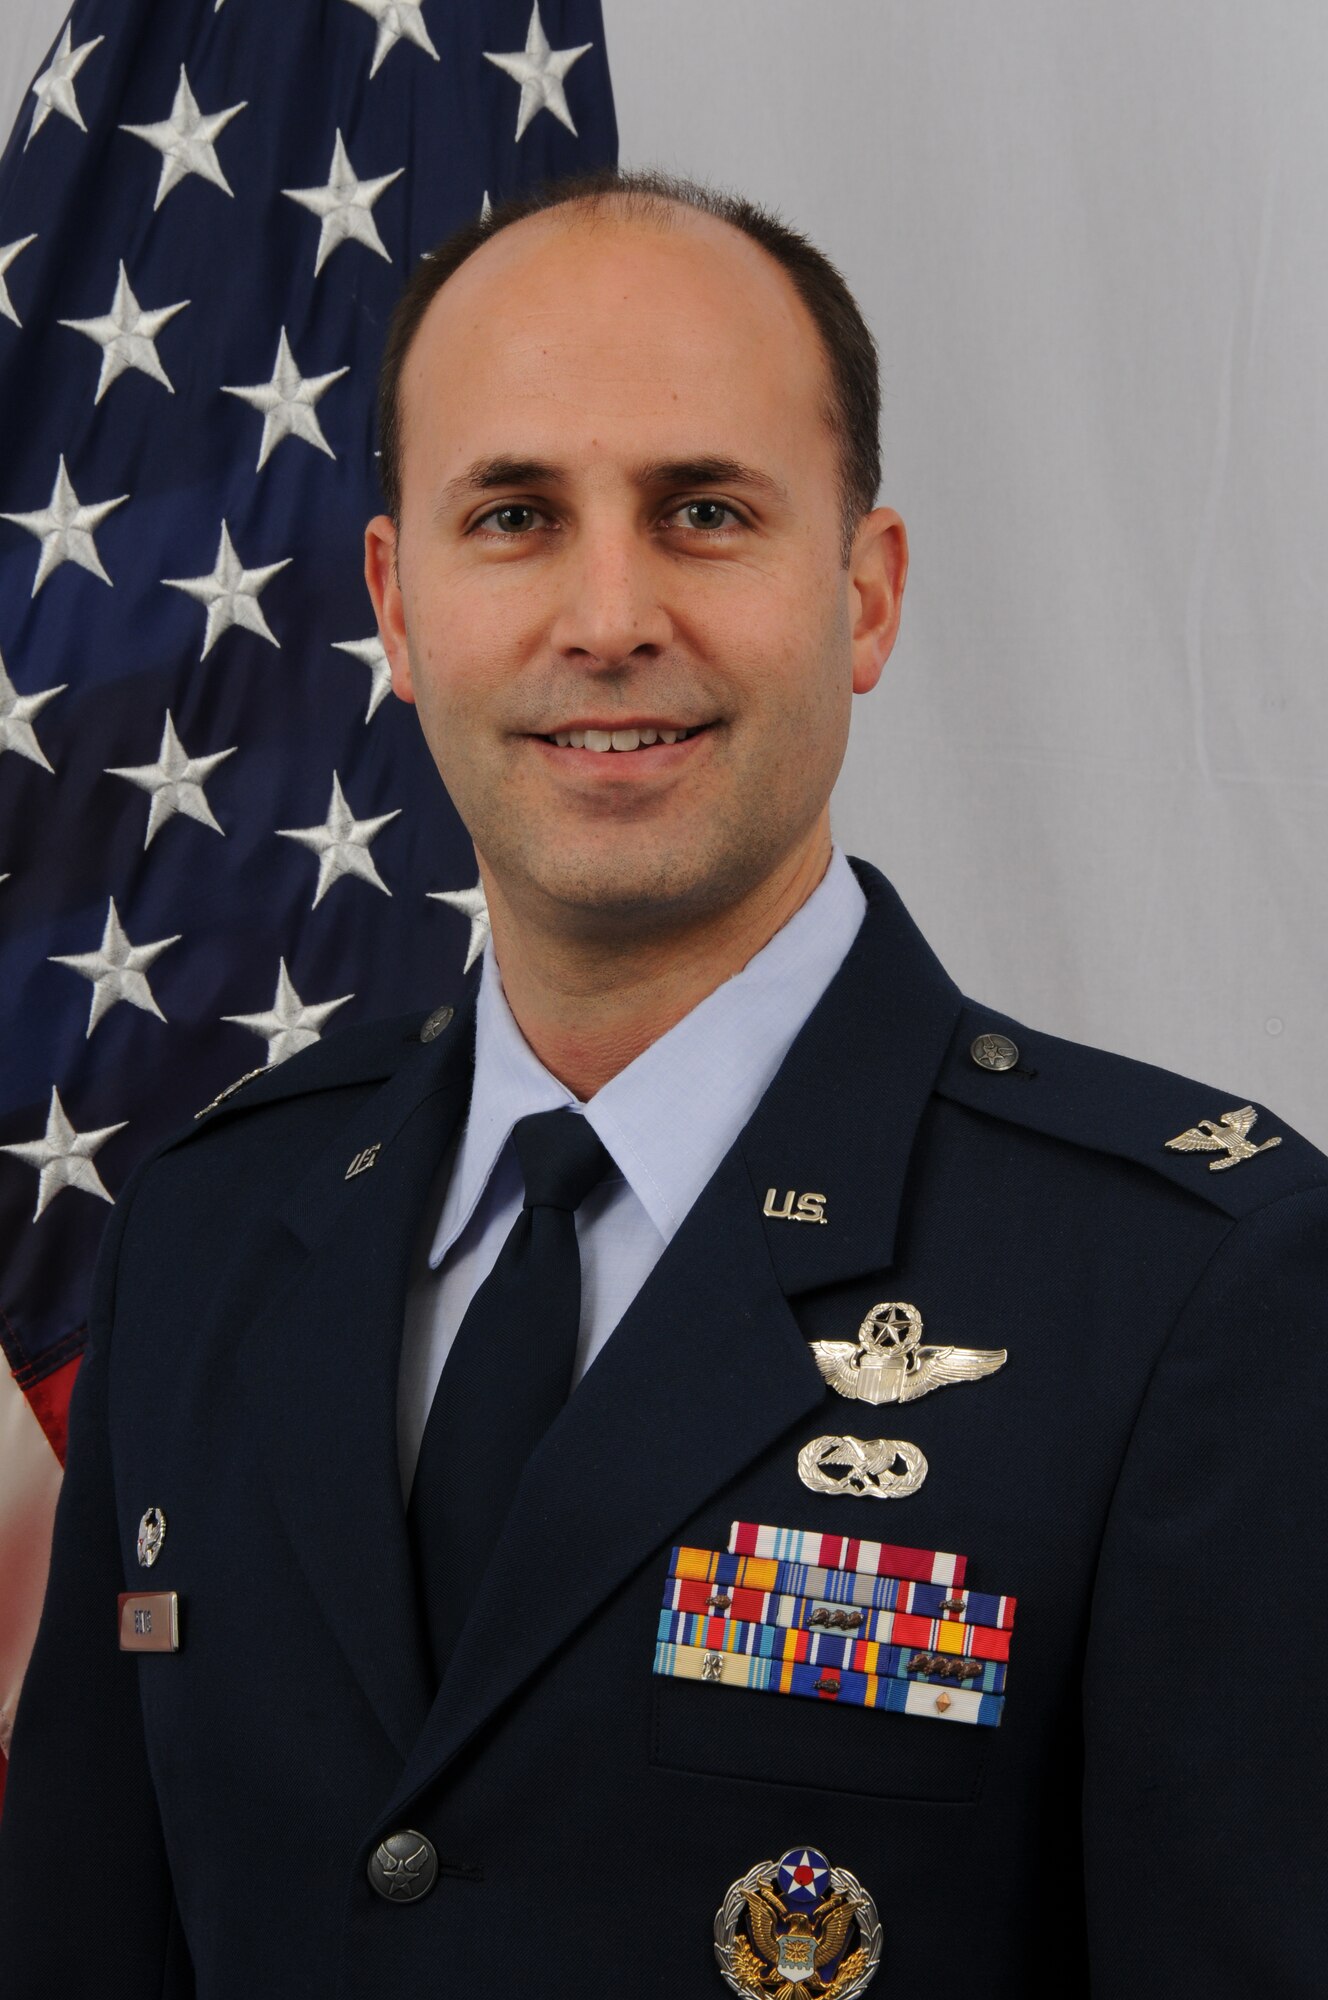 U.S. Air Force Col. Donald R. Bevis